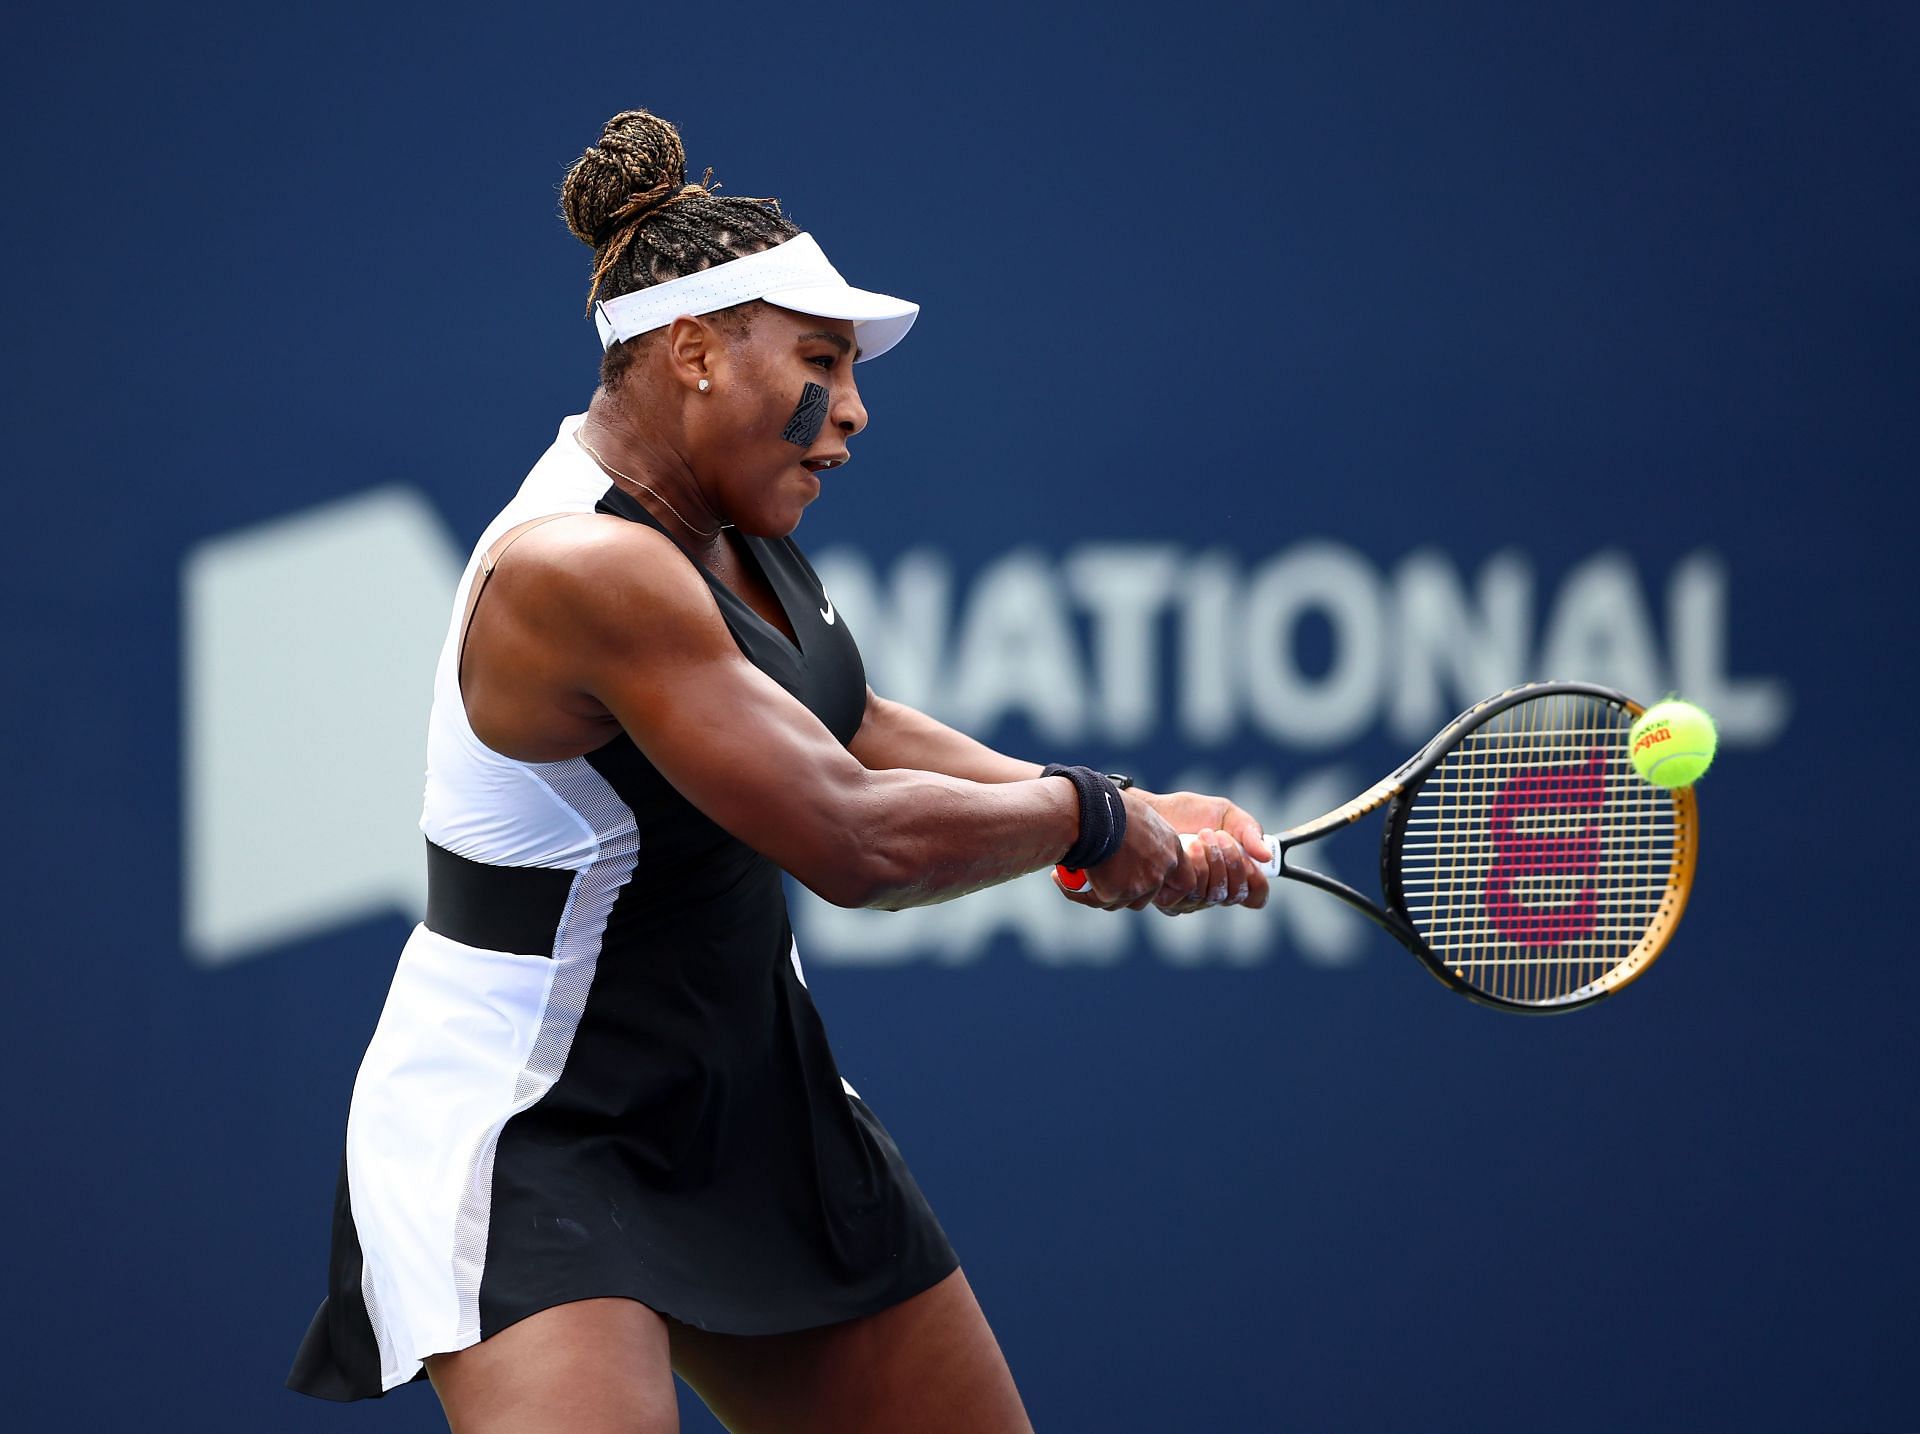 Serena Williams moved to the second round of the Canadian Open